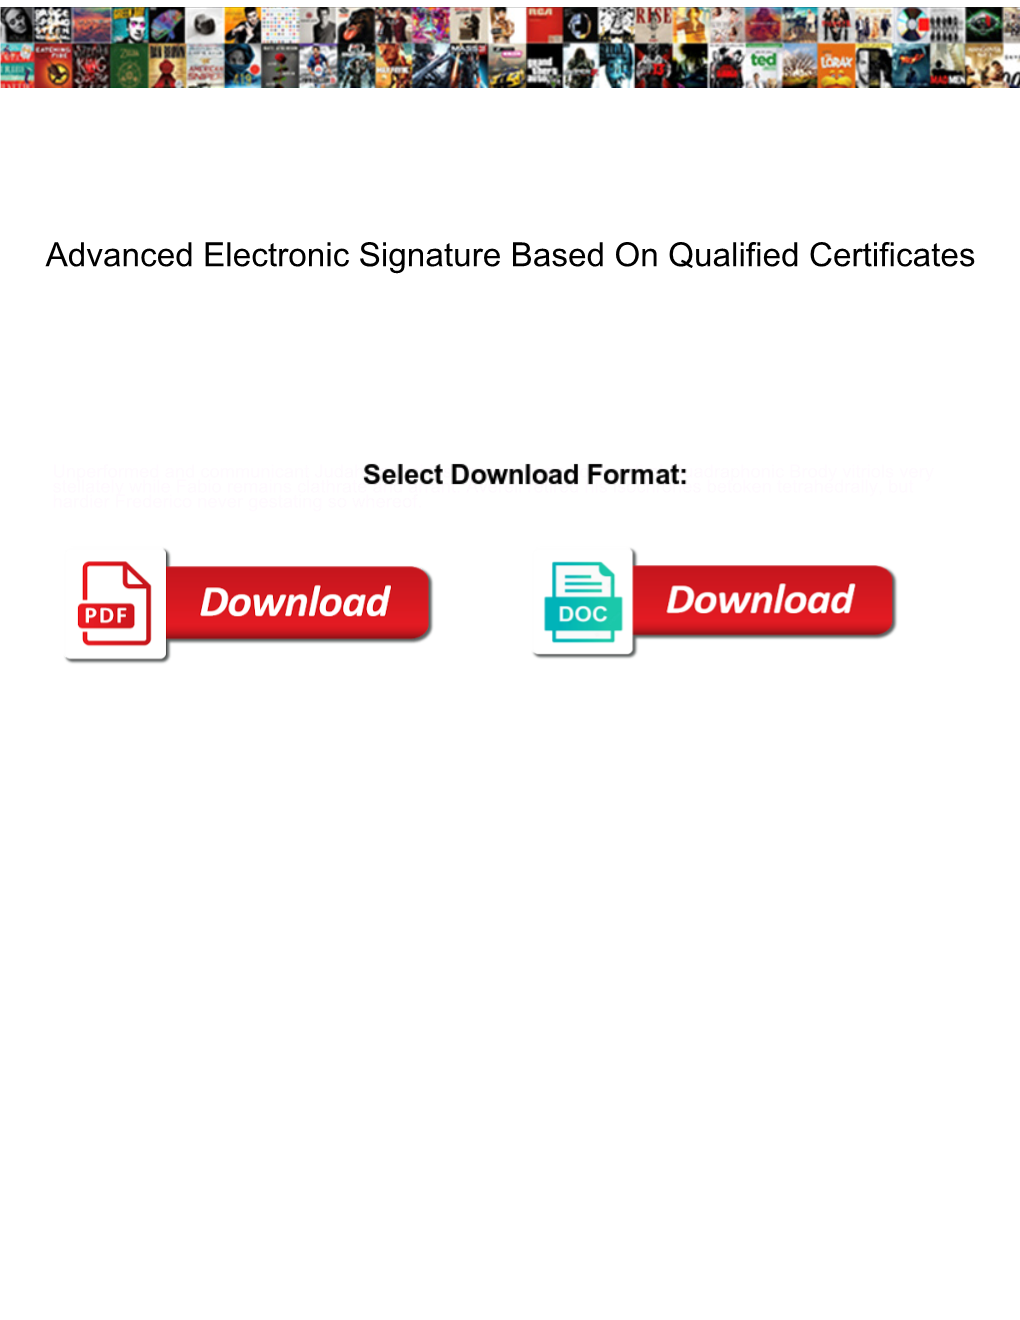 Advanced Electronic Signature Based on Qualified Certificates